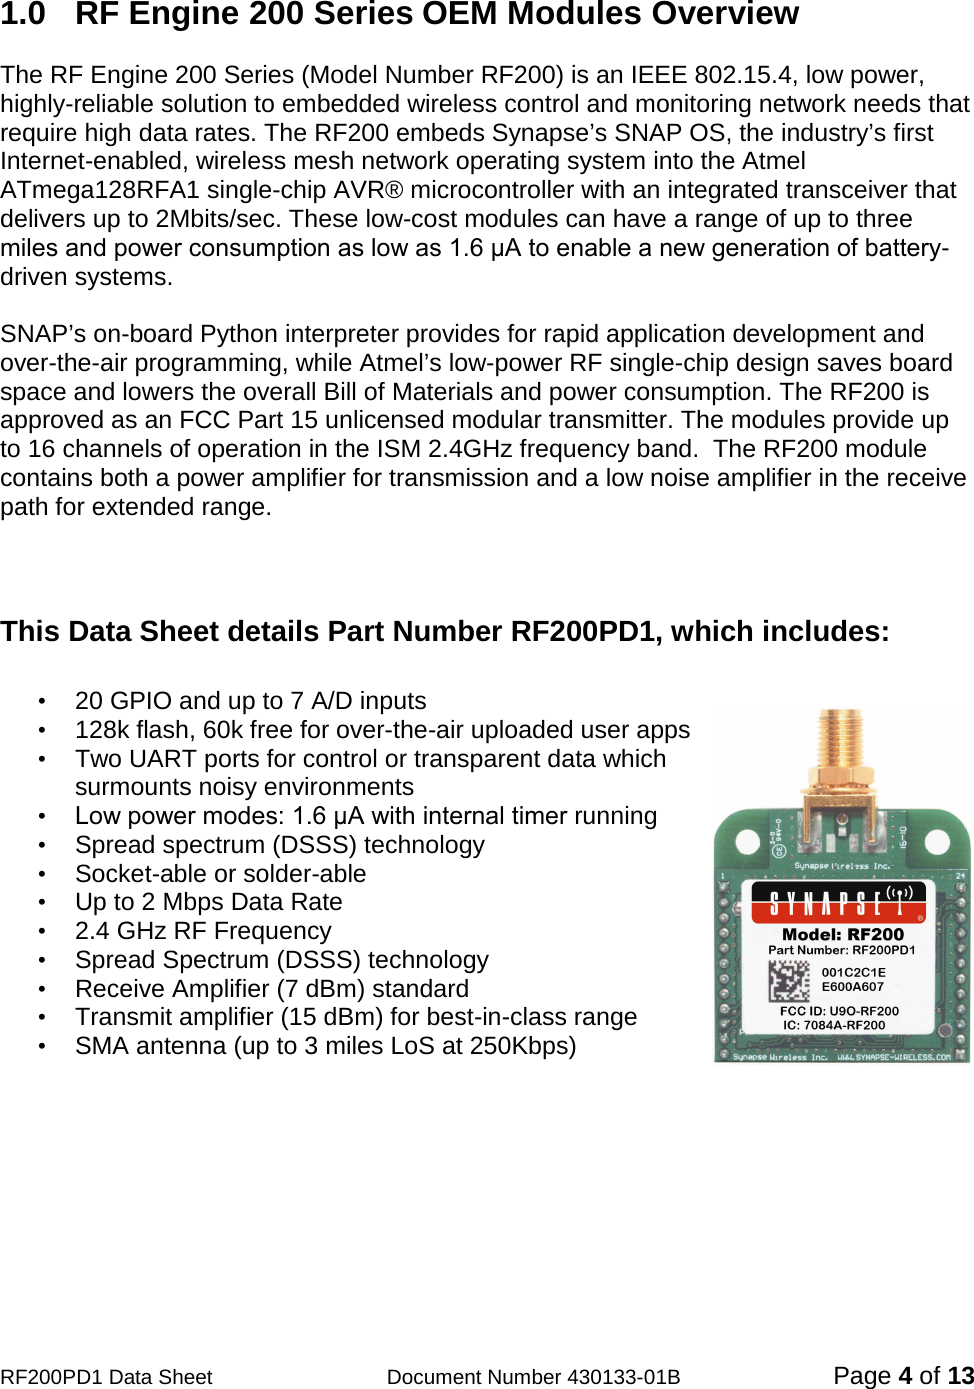                                            RF200PD1 Data Sheet                  Document Number 430133-01B  Page 4 of 13  1.0  RF Engine 200 Series OEM Modules Overview  The RF Engine 200 Series (Model Number RF200) is an IEEE 802.15.4, low power, highly-reliable solution to embedded wireless control and monitoring network needs that require high data rates. The RF200 embeds Synapse’s SNAP OS, the industry’s first Internet-enabled, wireless mesh network operating system into the Atmel ATmega128RFA1 single-chip AVR® microcontroller with an integrated transceiver that delivers up to 2Mbits/sec. These low-cost modules can have a range of up to three miles and power consumption as low as 1.6 μA to enable a new generation of battery-driven systems.  SNAP’s on-board Python interpreter provides for rapid application development and over-the-air programming, while Atmel’s low-power RF single-chip design saves board space and lowers the overall Bill of Materials and power consumption. The RF200 is approved as an FCC Part 15 unlicensed modular transmitter. The modules provide up to 16 channels of operation in the ISM 2.4GHz frequency band.  The RF200 module contains both a power amplifier for transmission and a low noise amplifier in the receive path for extended range.    This Data Sheet details Part Number RF200PD1, which includes:  • 20 GPIO and up to 7 A/D inputs                                • 128k flash, 60k free for over-the-air uploaded user apps • Two UART ports for control or transparent data which surmounts noisy environments   • Low power modes: 1.6 μA with internal timer running • Spread spectrum (DSSS) technology  •  Socket-able or solder-able • Up to 2 Mbps Data Rate • 2.4 GHz RF Frequency • Spread Spectrum (DSSS) technology • Receive Amplifier (7 dBm) standard • Transmit amplifier (15 dBm) for best-in-class range • SMA antenna (up to 3 miles LoS at 250Kbps)  